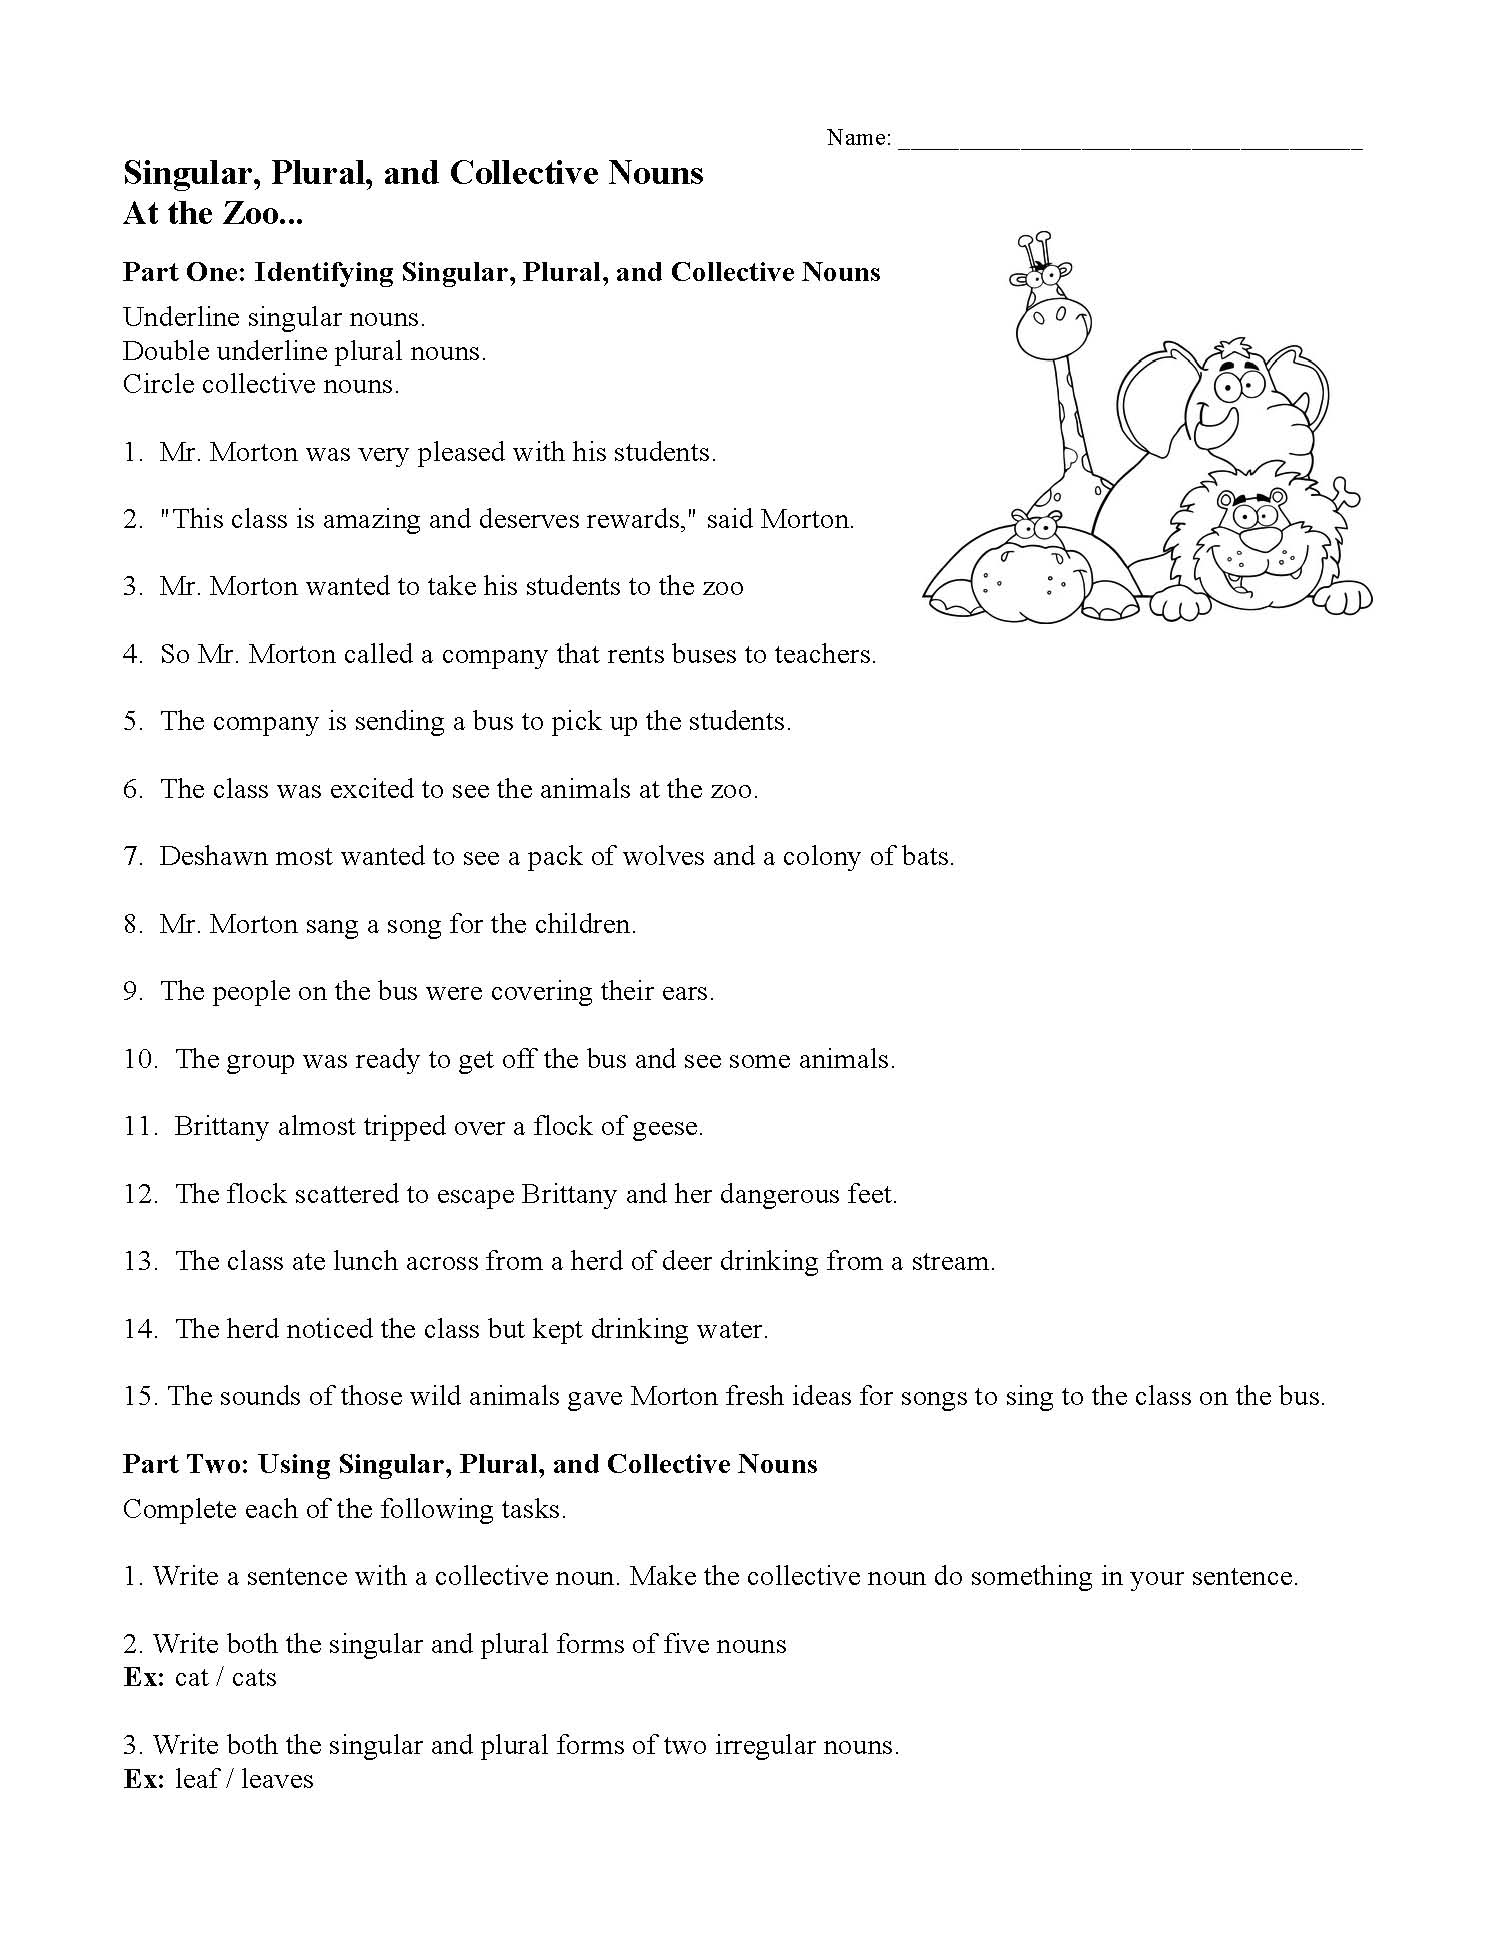 noun-worksheets-lessons-and-tests-parts-of-speech-activities